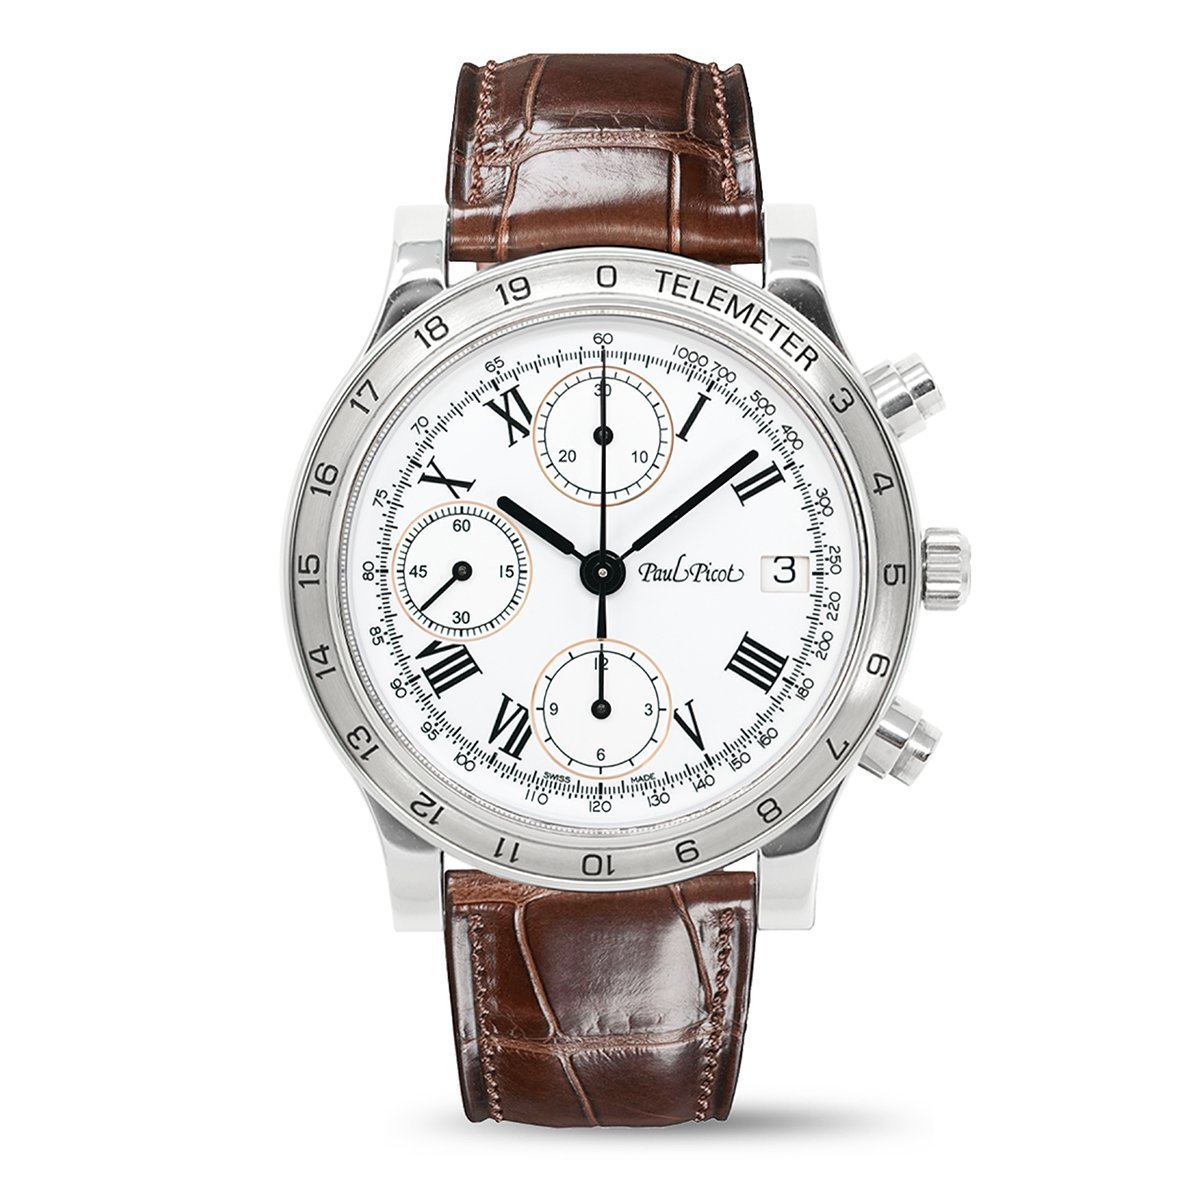 Paul Picot Men's Watch Telemeter Chronograph White P7004A20.113 - Watches & Crystals